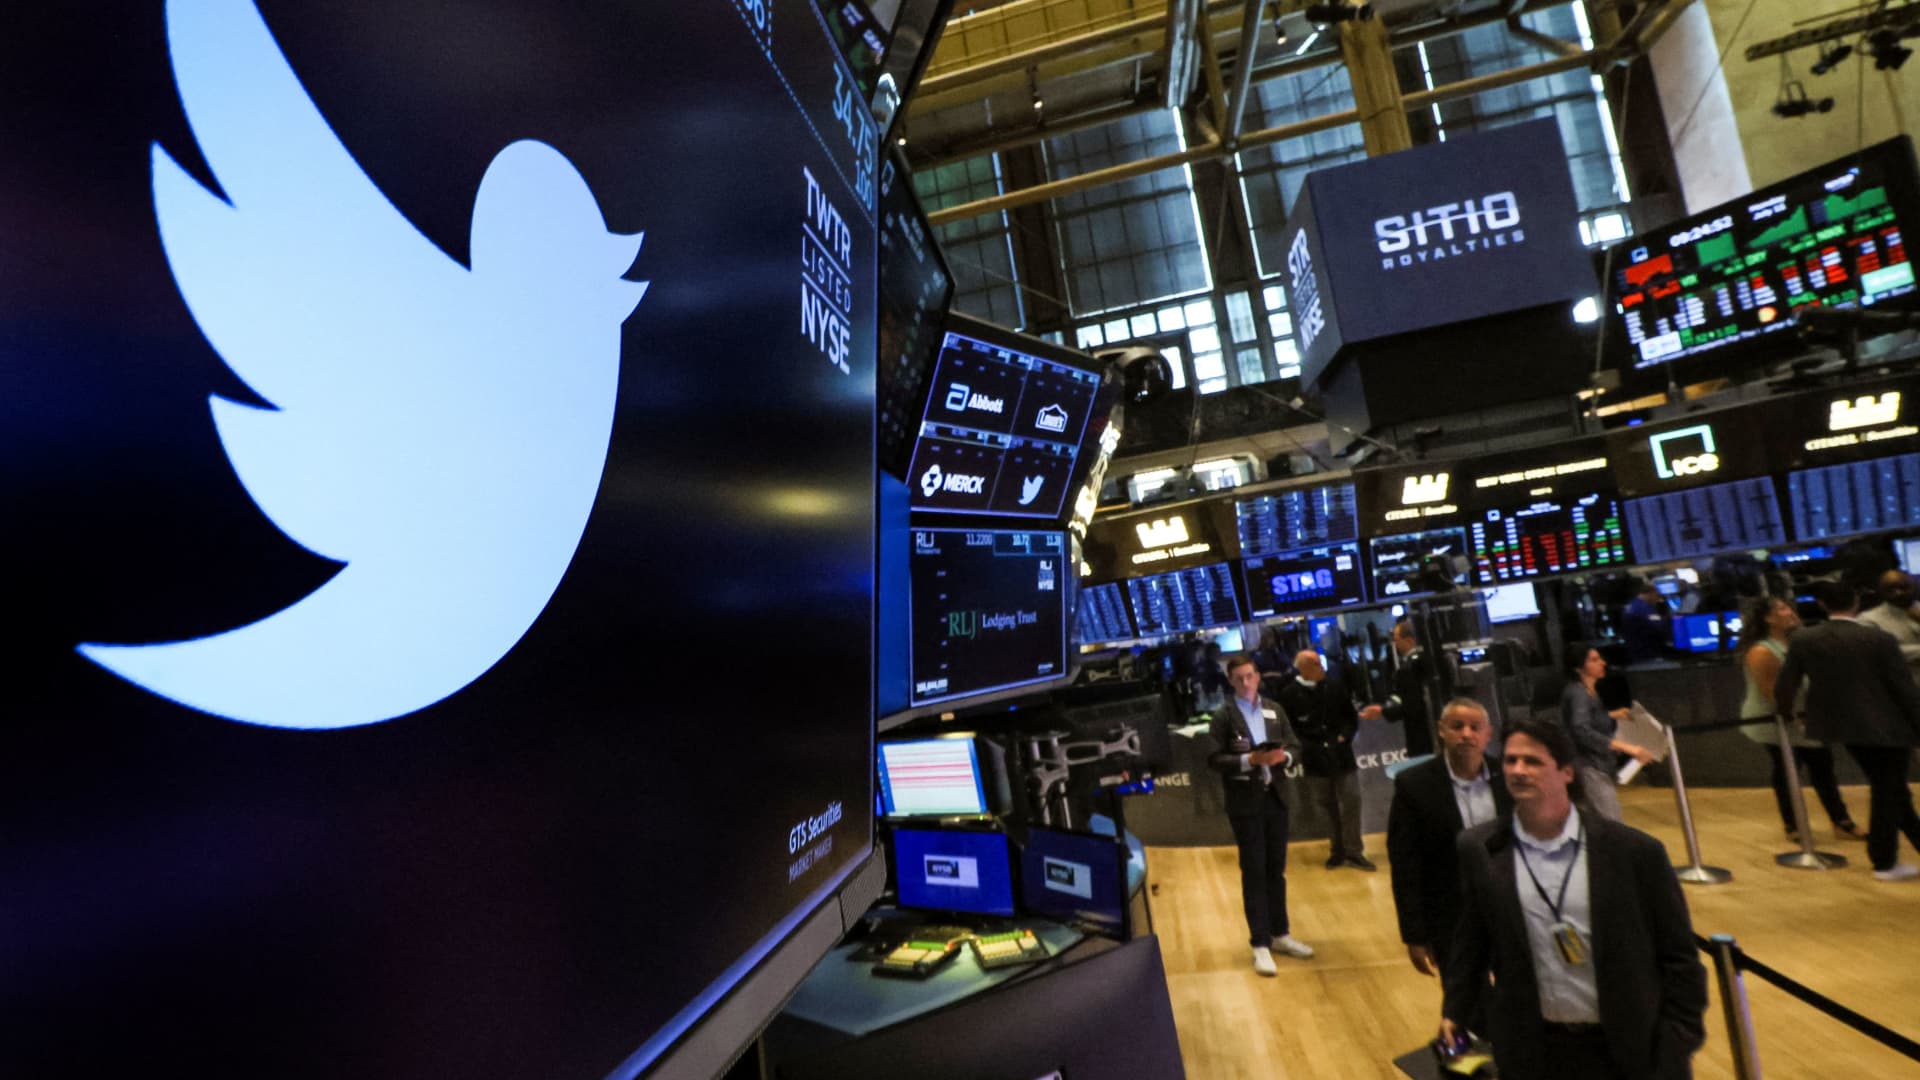 The logo and trading symbol for Twitter is displayed on a screen on the floor of the New York Stock Exchange (NYSE) in New York City, July 11, 2022.